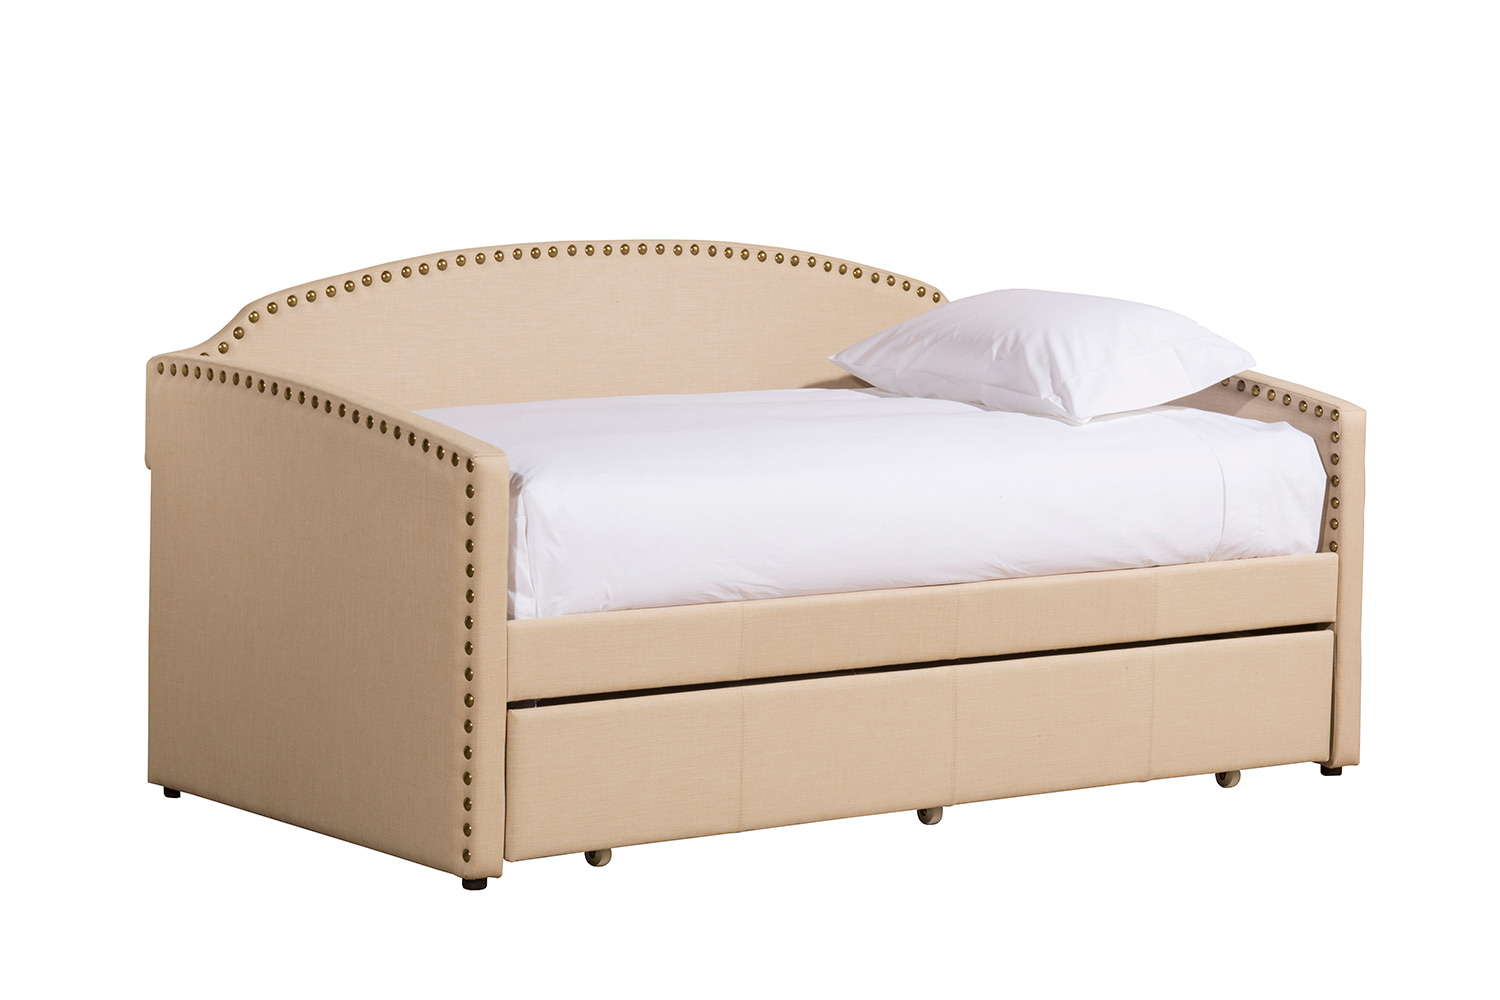 Hillsdale Lani Daybed - Cream